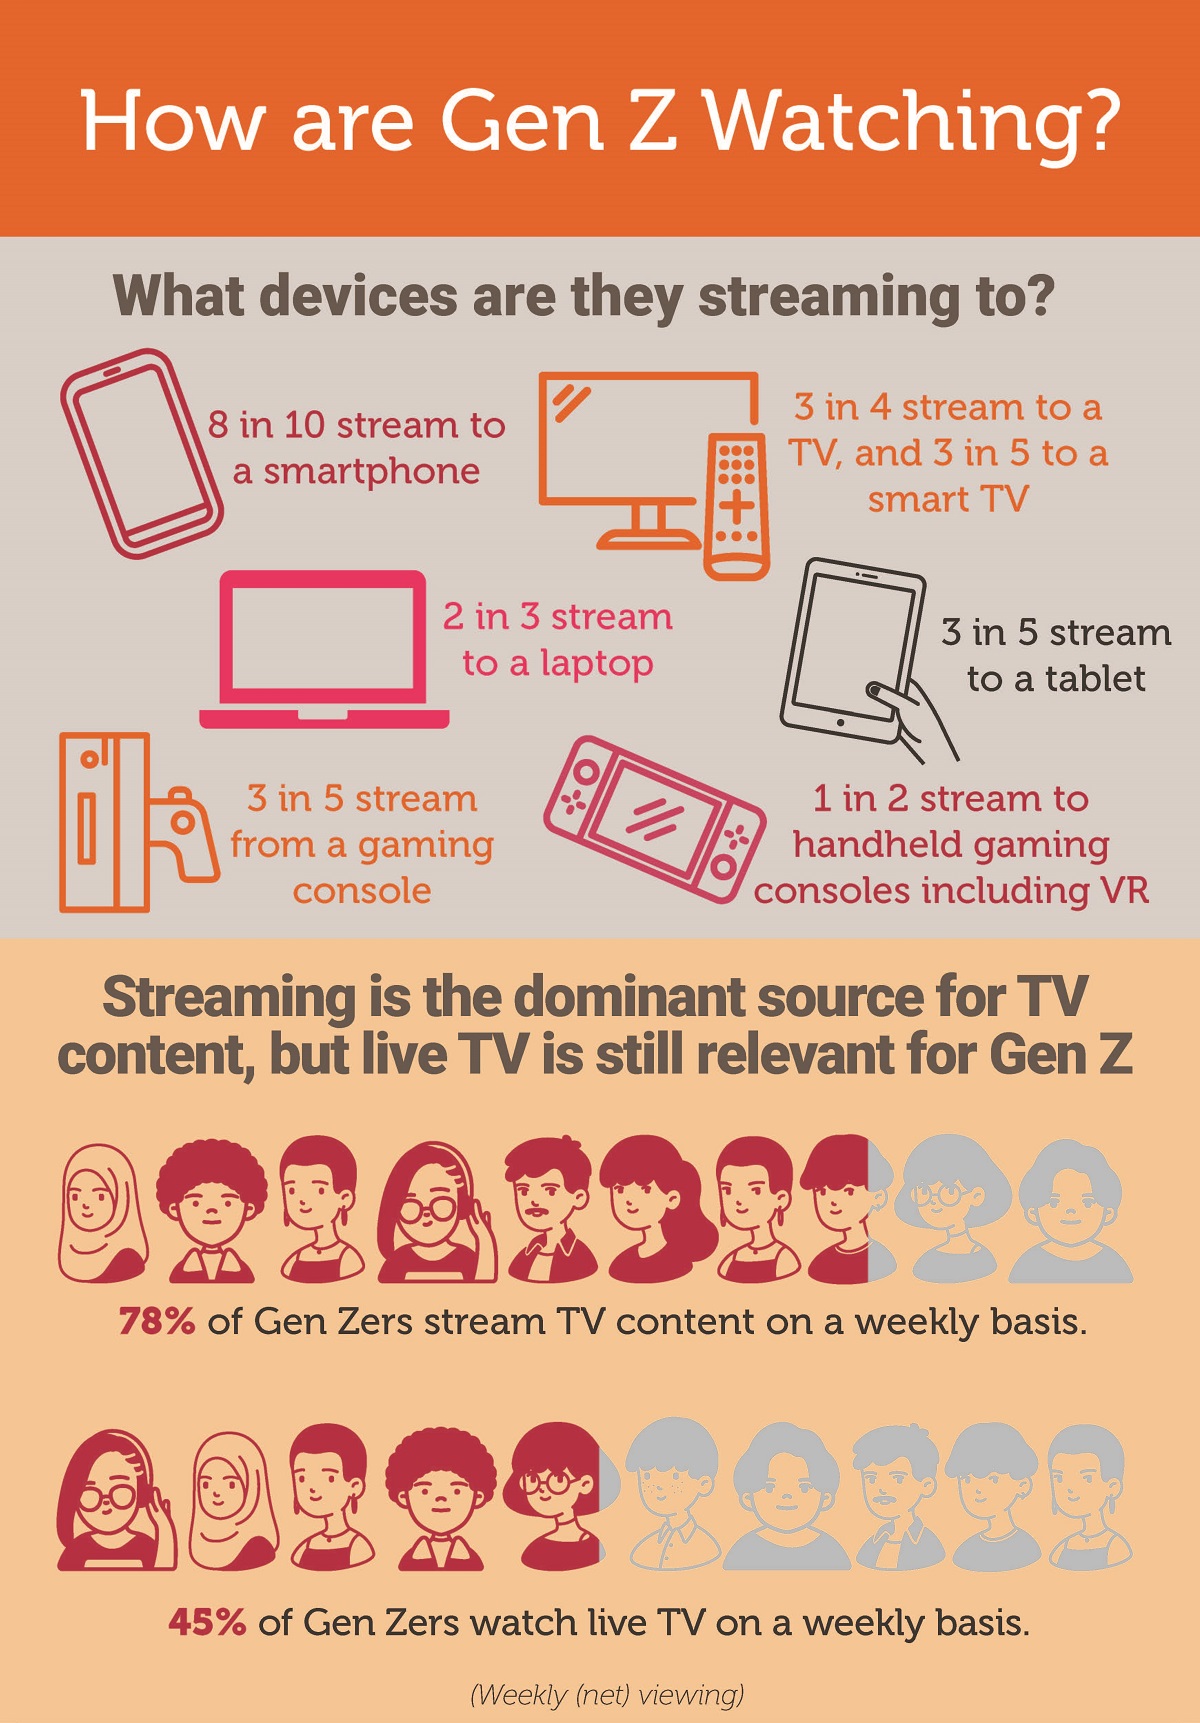 The “State of Gen Z 2021” report shows that streaming is the dominant source for TV content, but live TV is still relevant. Cr: Horowitz Research